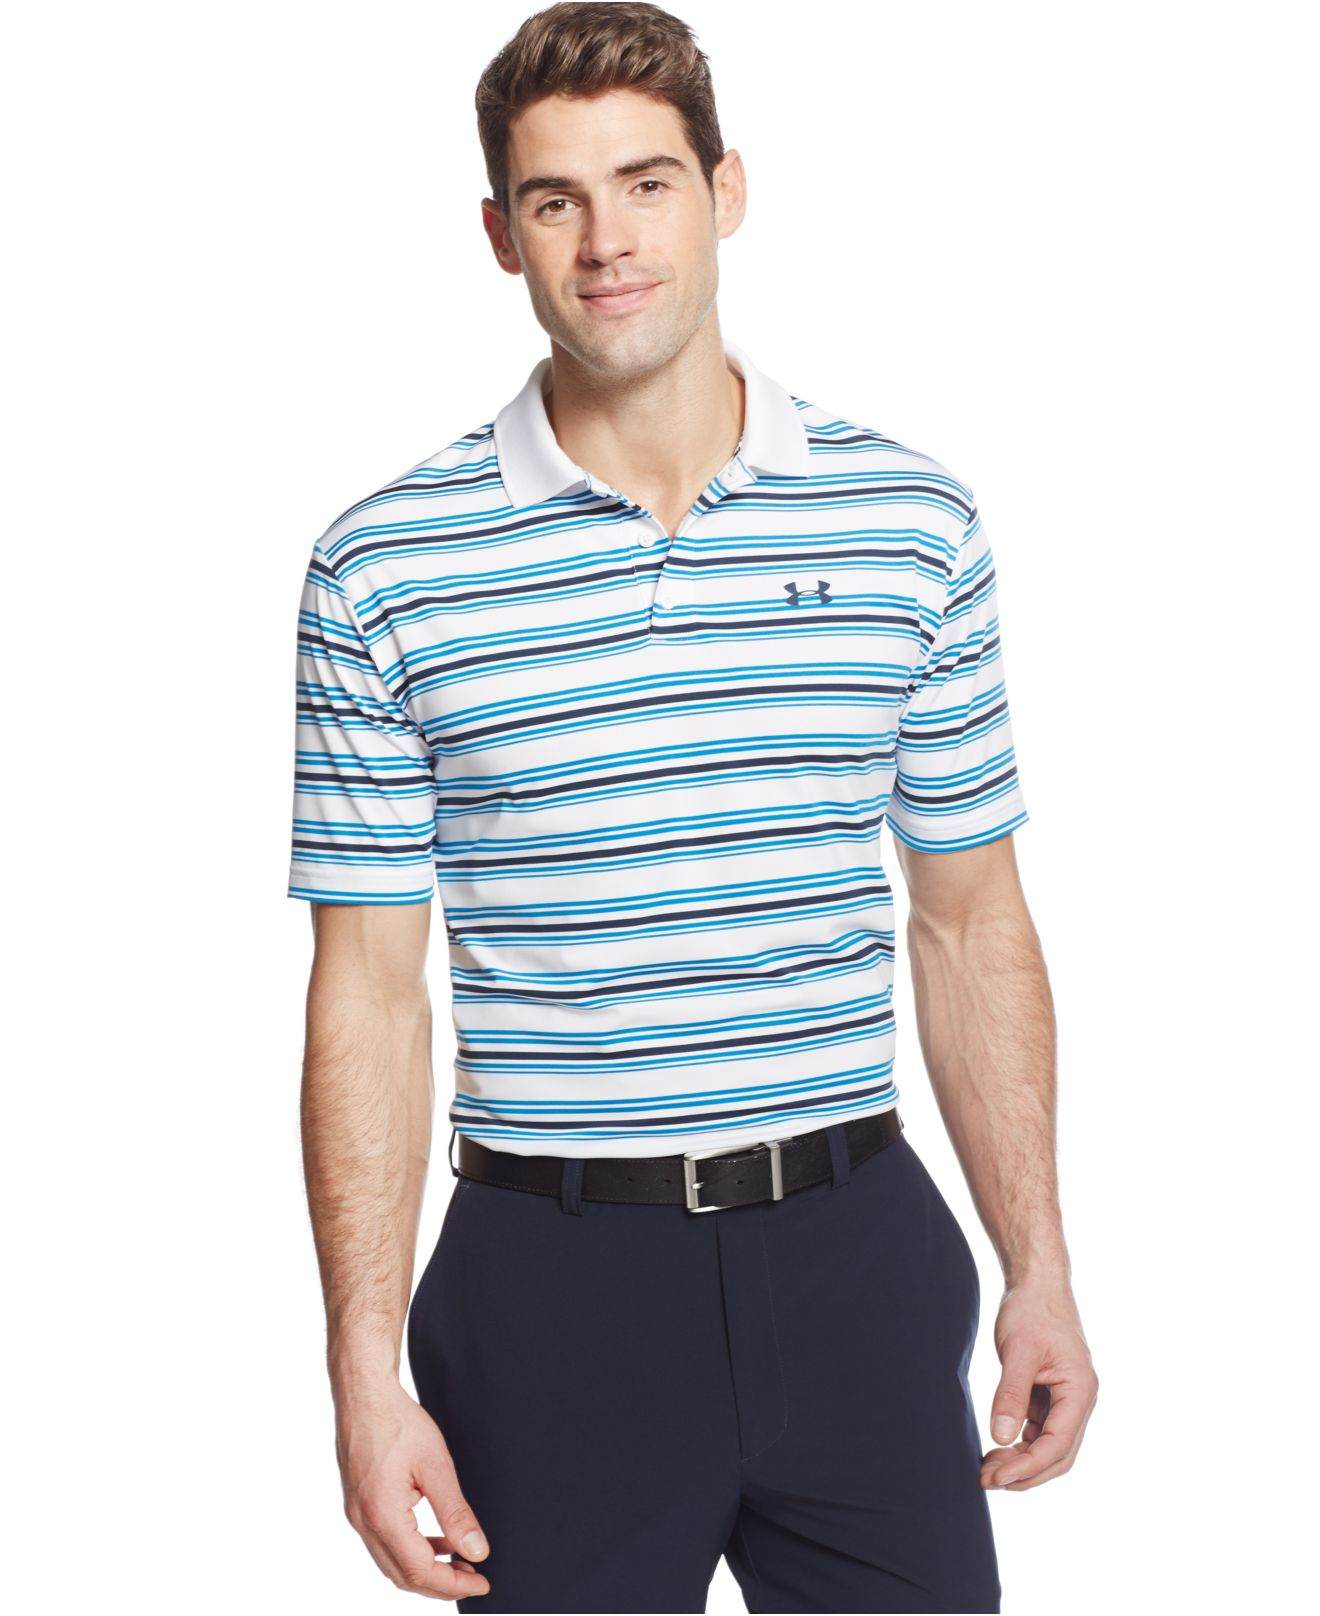 Lyst - Under Armour Clubhouse Striped Golf Polo in Blue for Men